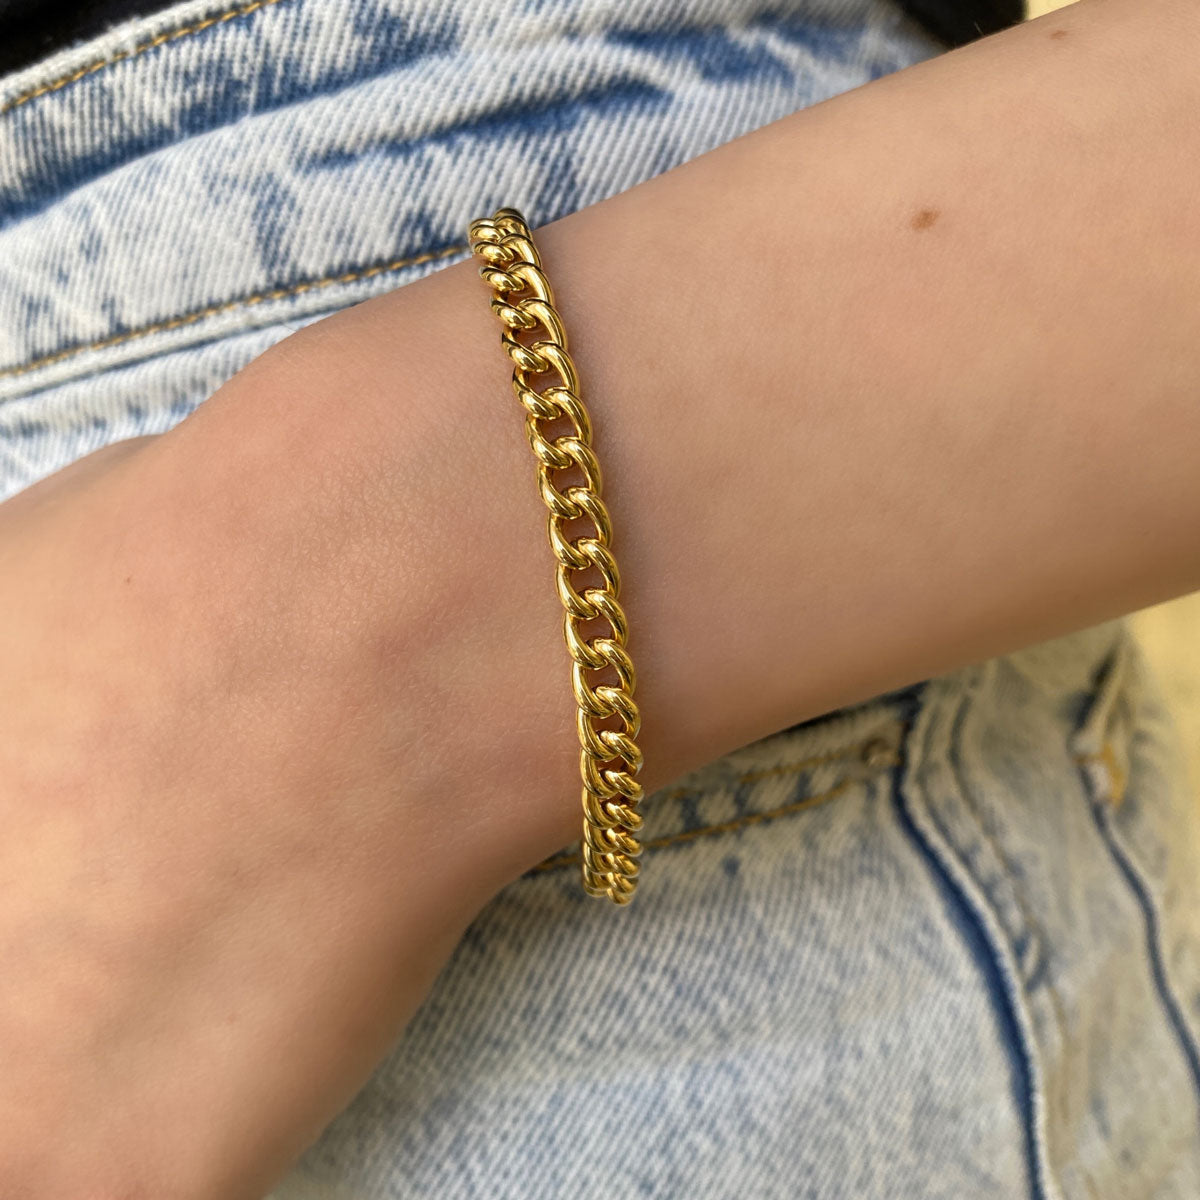 14K Dainty Cuban Link Chain Bracelet 14K Yellow Gold / 7.5 Inches by Baby Gold - Shop Custom Gold Jewelry